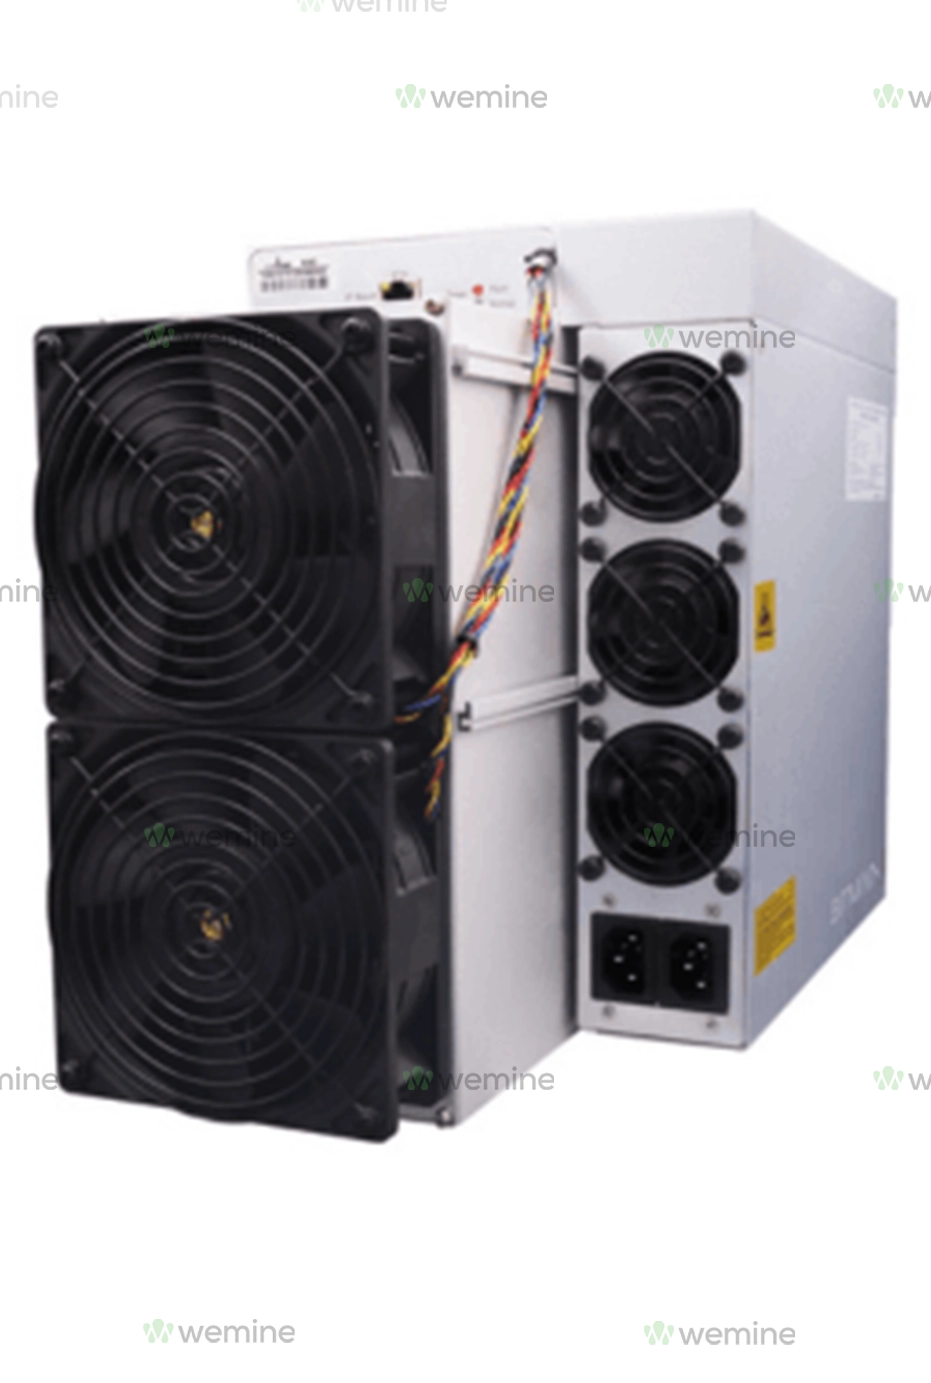 Bitmain Antminer KA3 mining rig with a dual-fan design for optimal cooling, featuring a white exterior with distinctive black accents and rear power supply inputs.